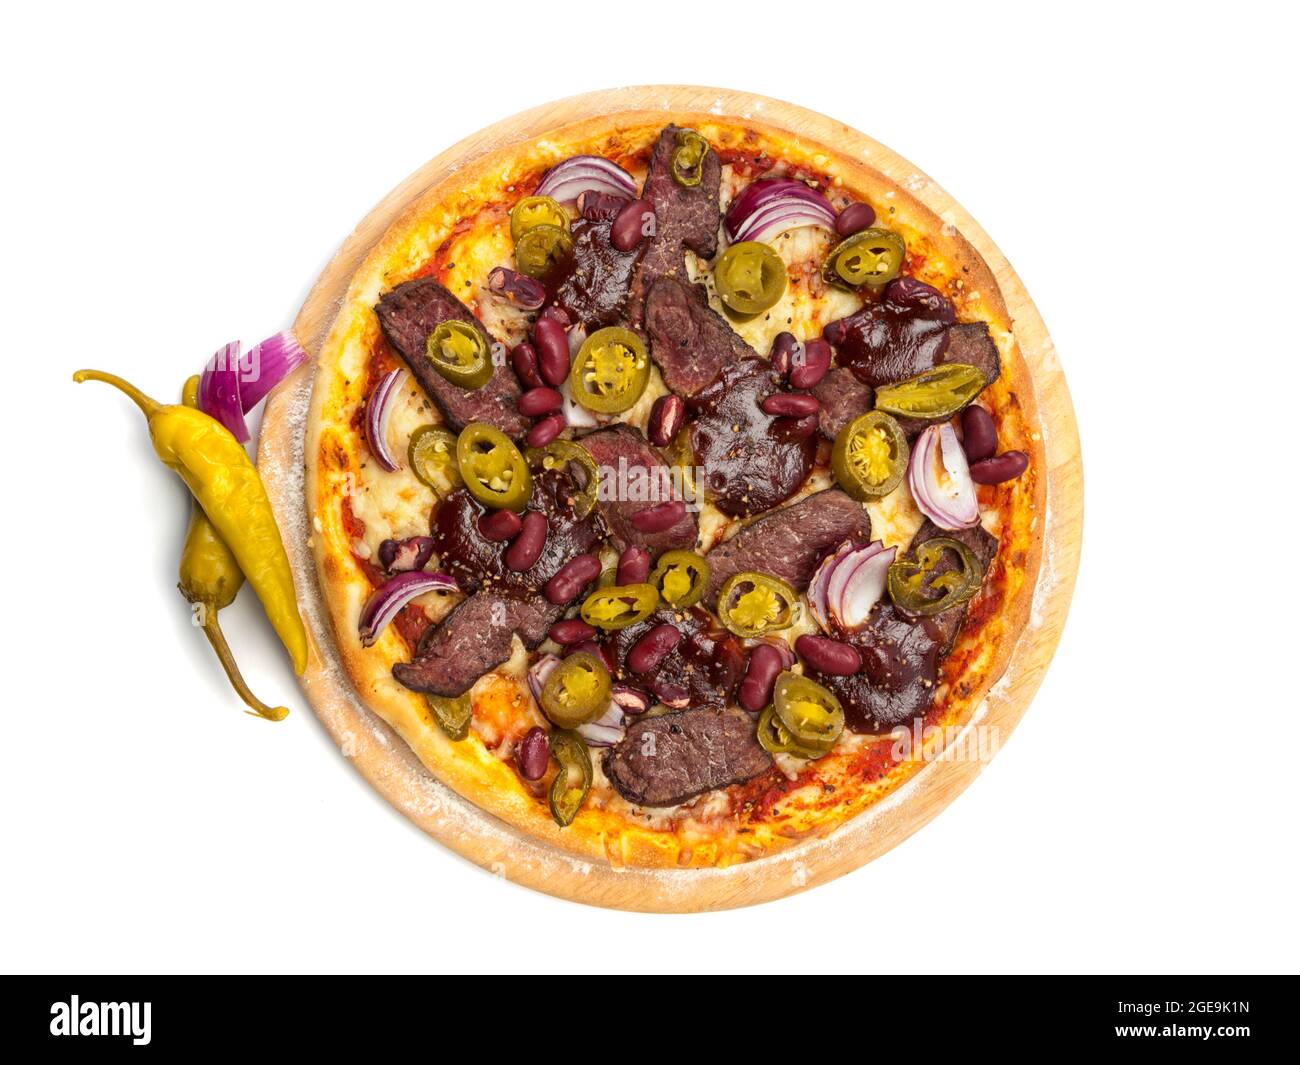 Pizza with beef fillet slices, green chili peppers, red onions and kidney beans on wooden platter isolated on white background, high angle view Stock Photo